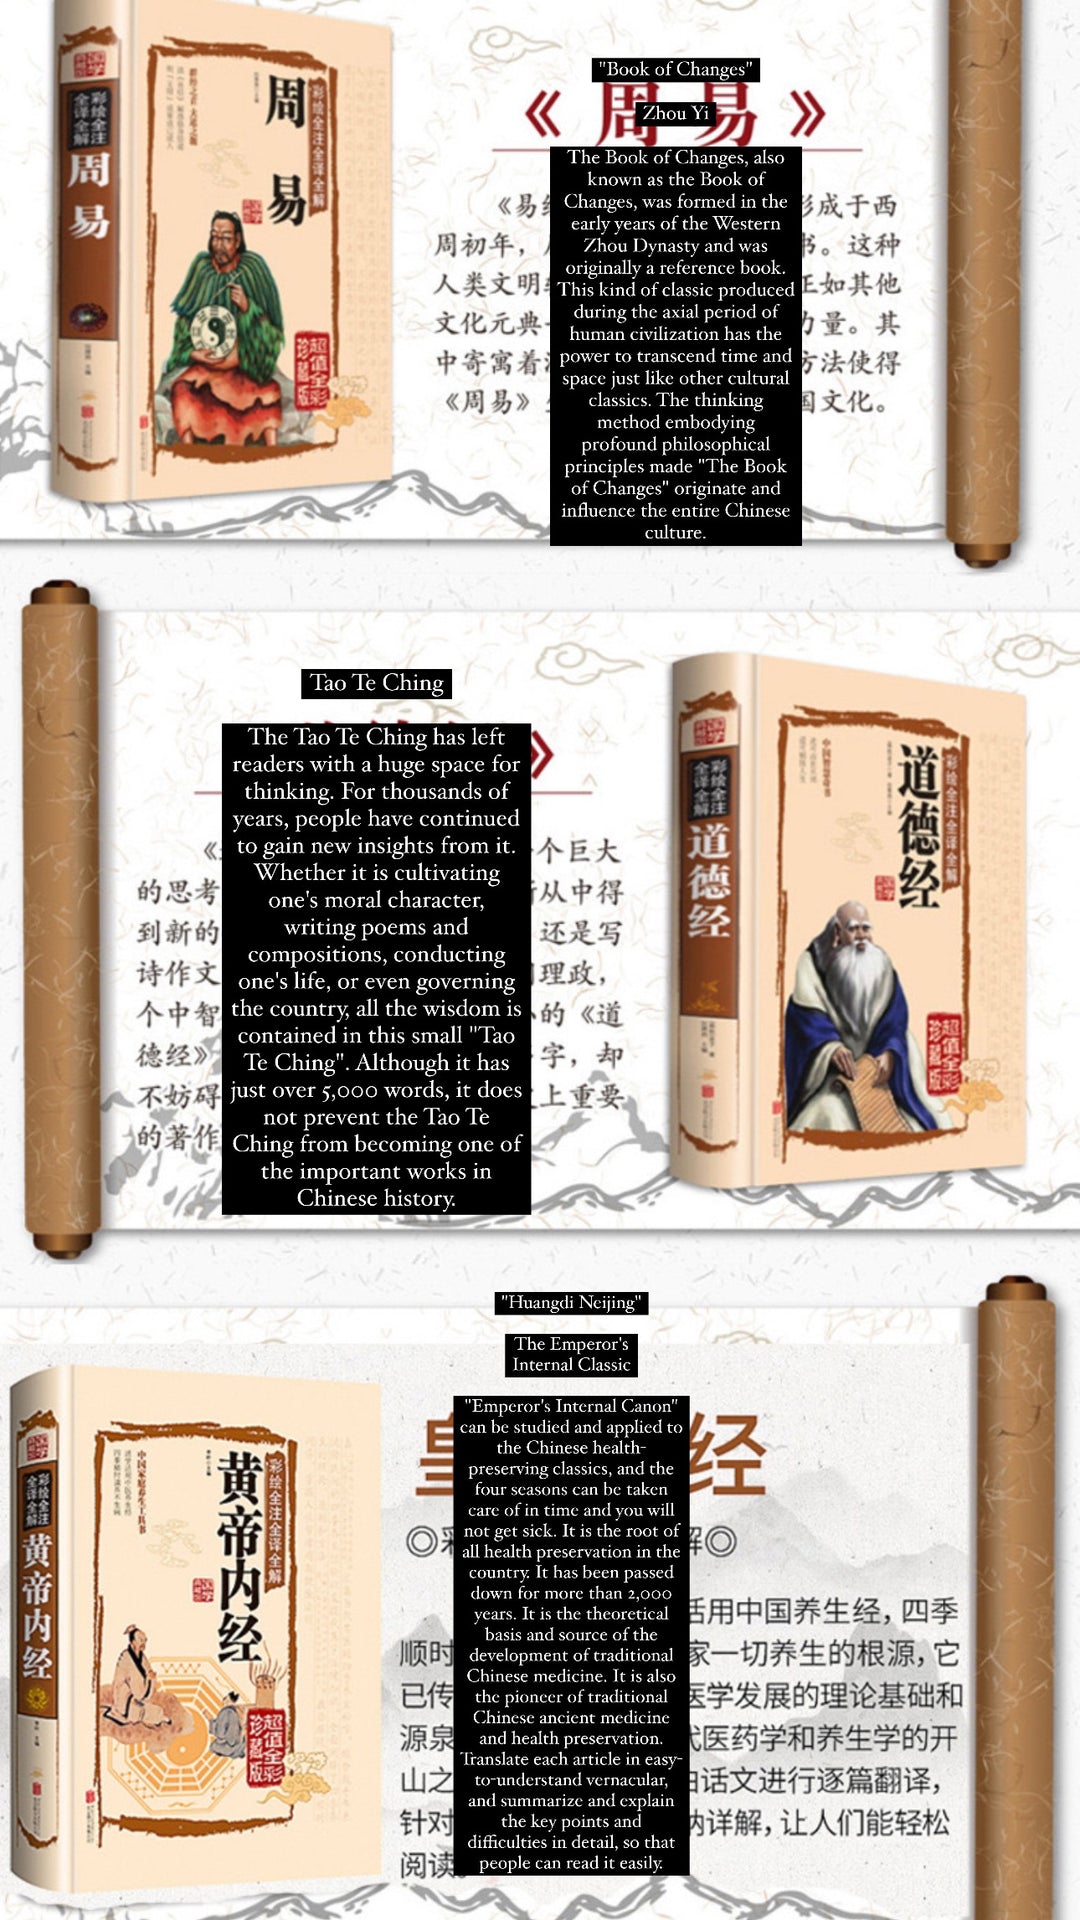 I Ching Book of Change • Original Chinese Classics • High Quality Hardcover • Full Colour Illustrations